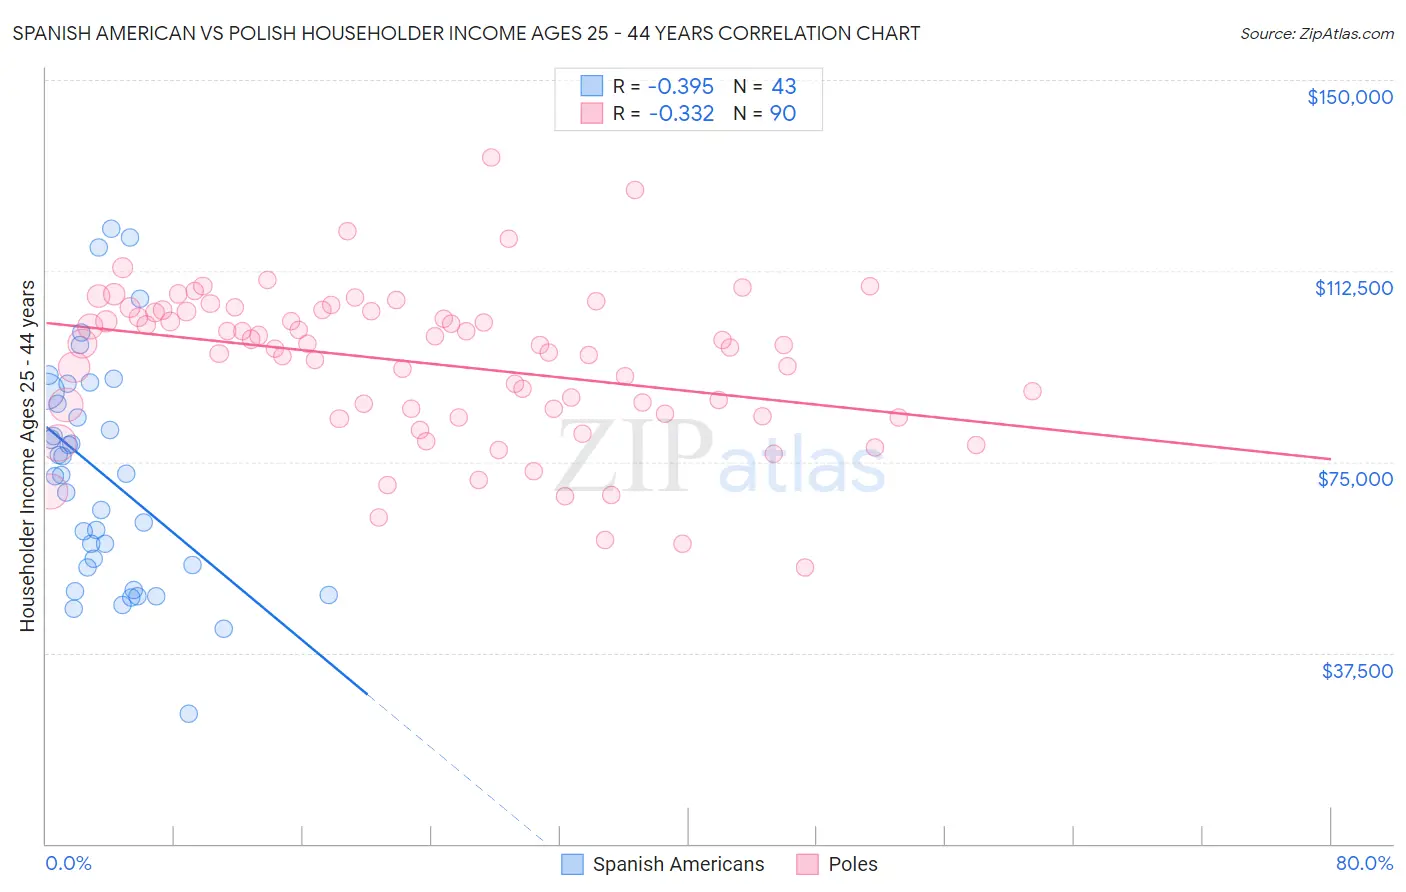 Spanish American vs Polish Householder Income Ages 25 - 44 years